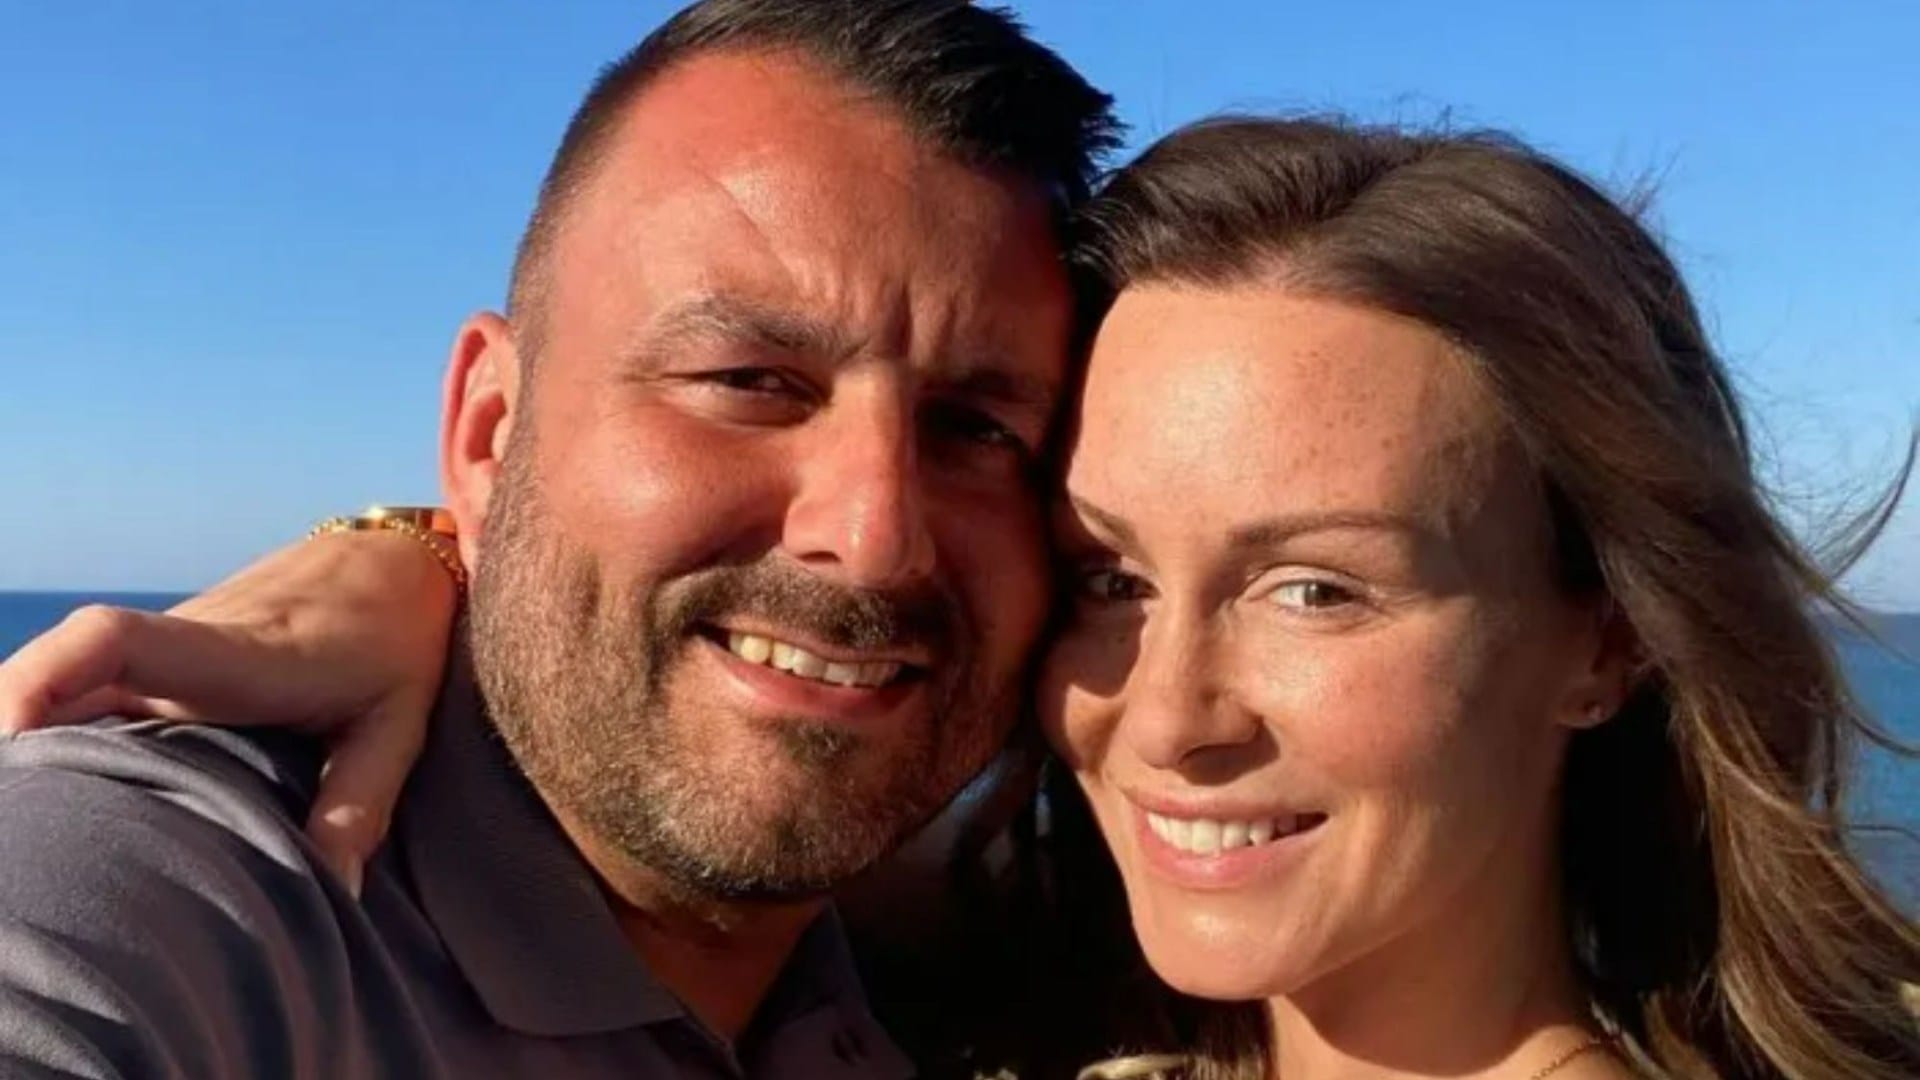 Big Brother legend Chanelle Hayes marries fiancé Dan Bingham as Towie star pal shares glimpse of wedding